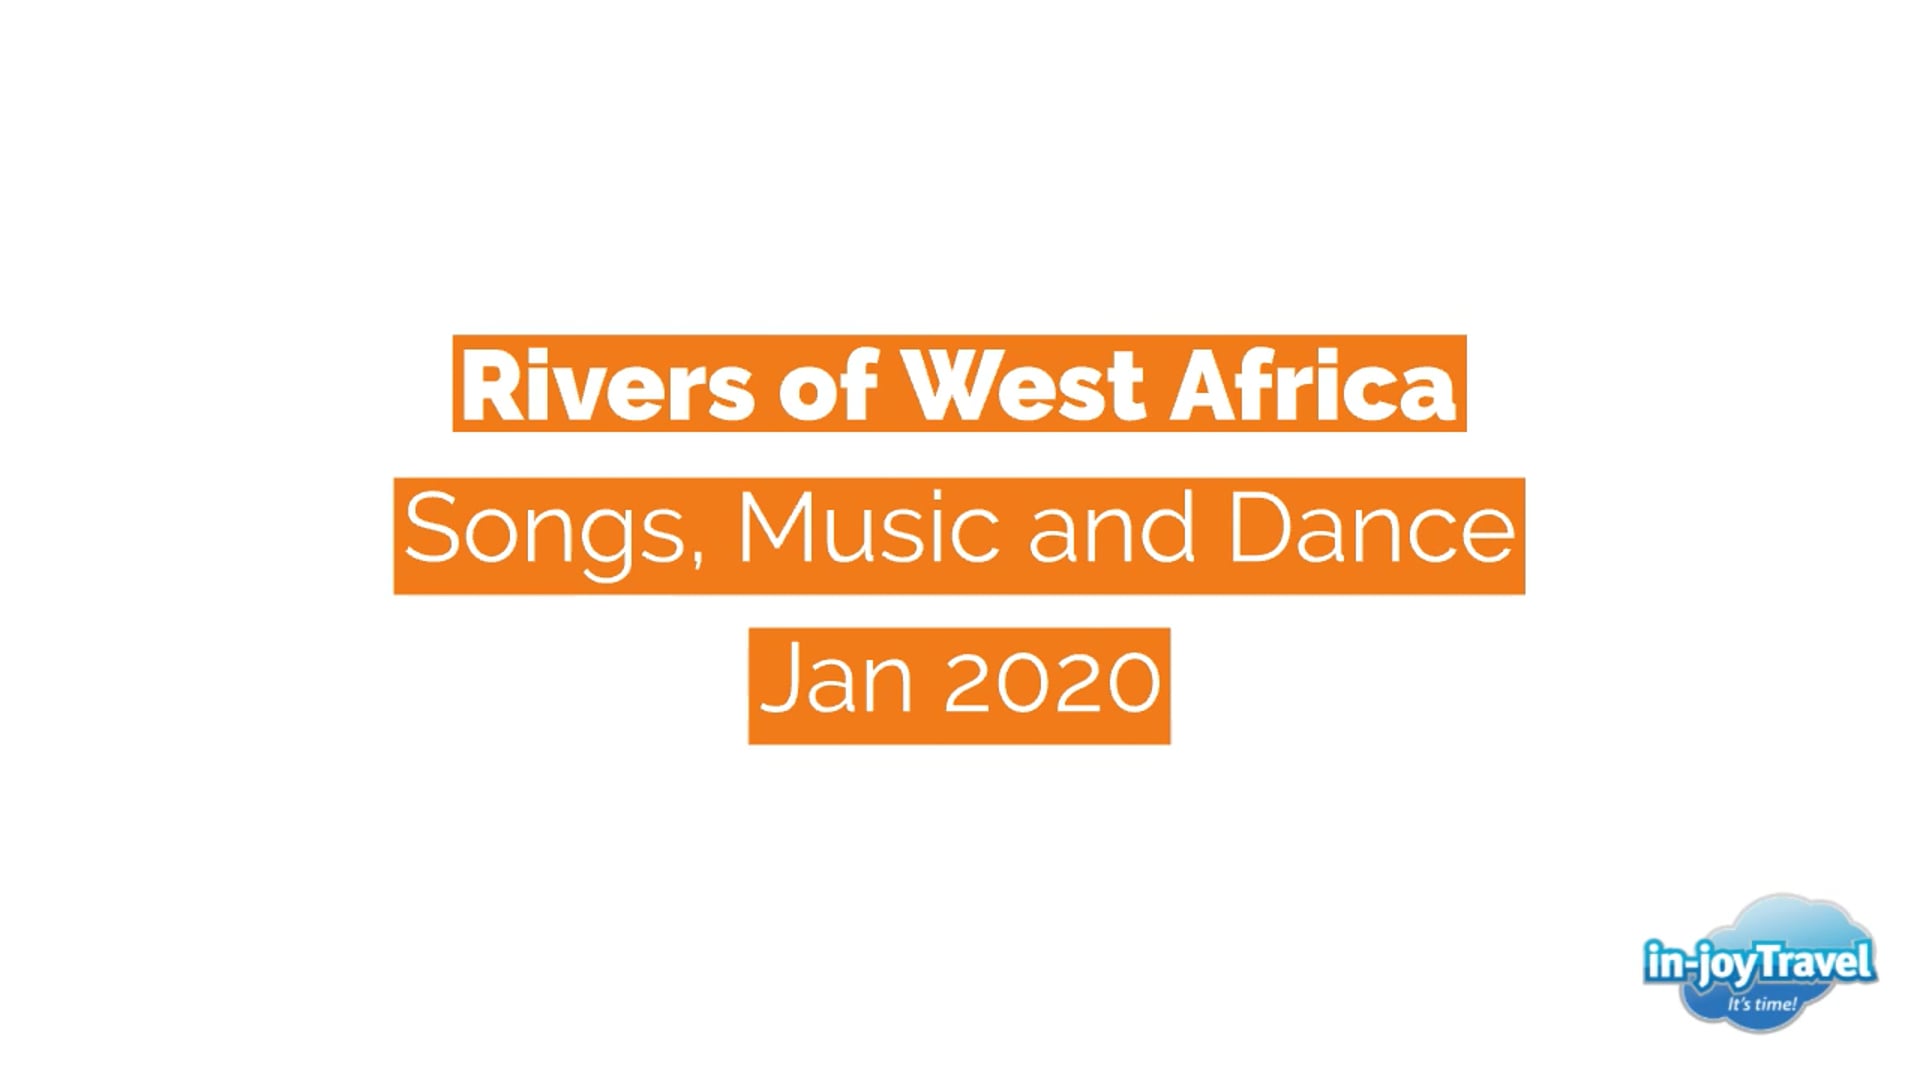 Rivers of West Africa - Music and Dance